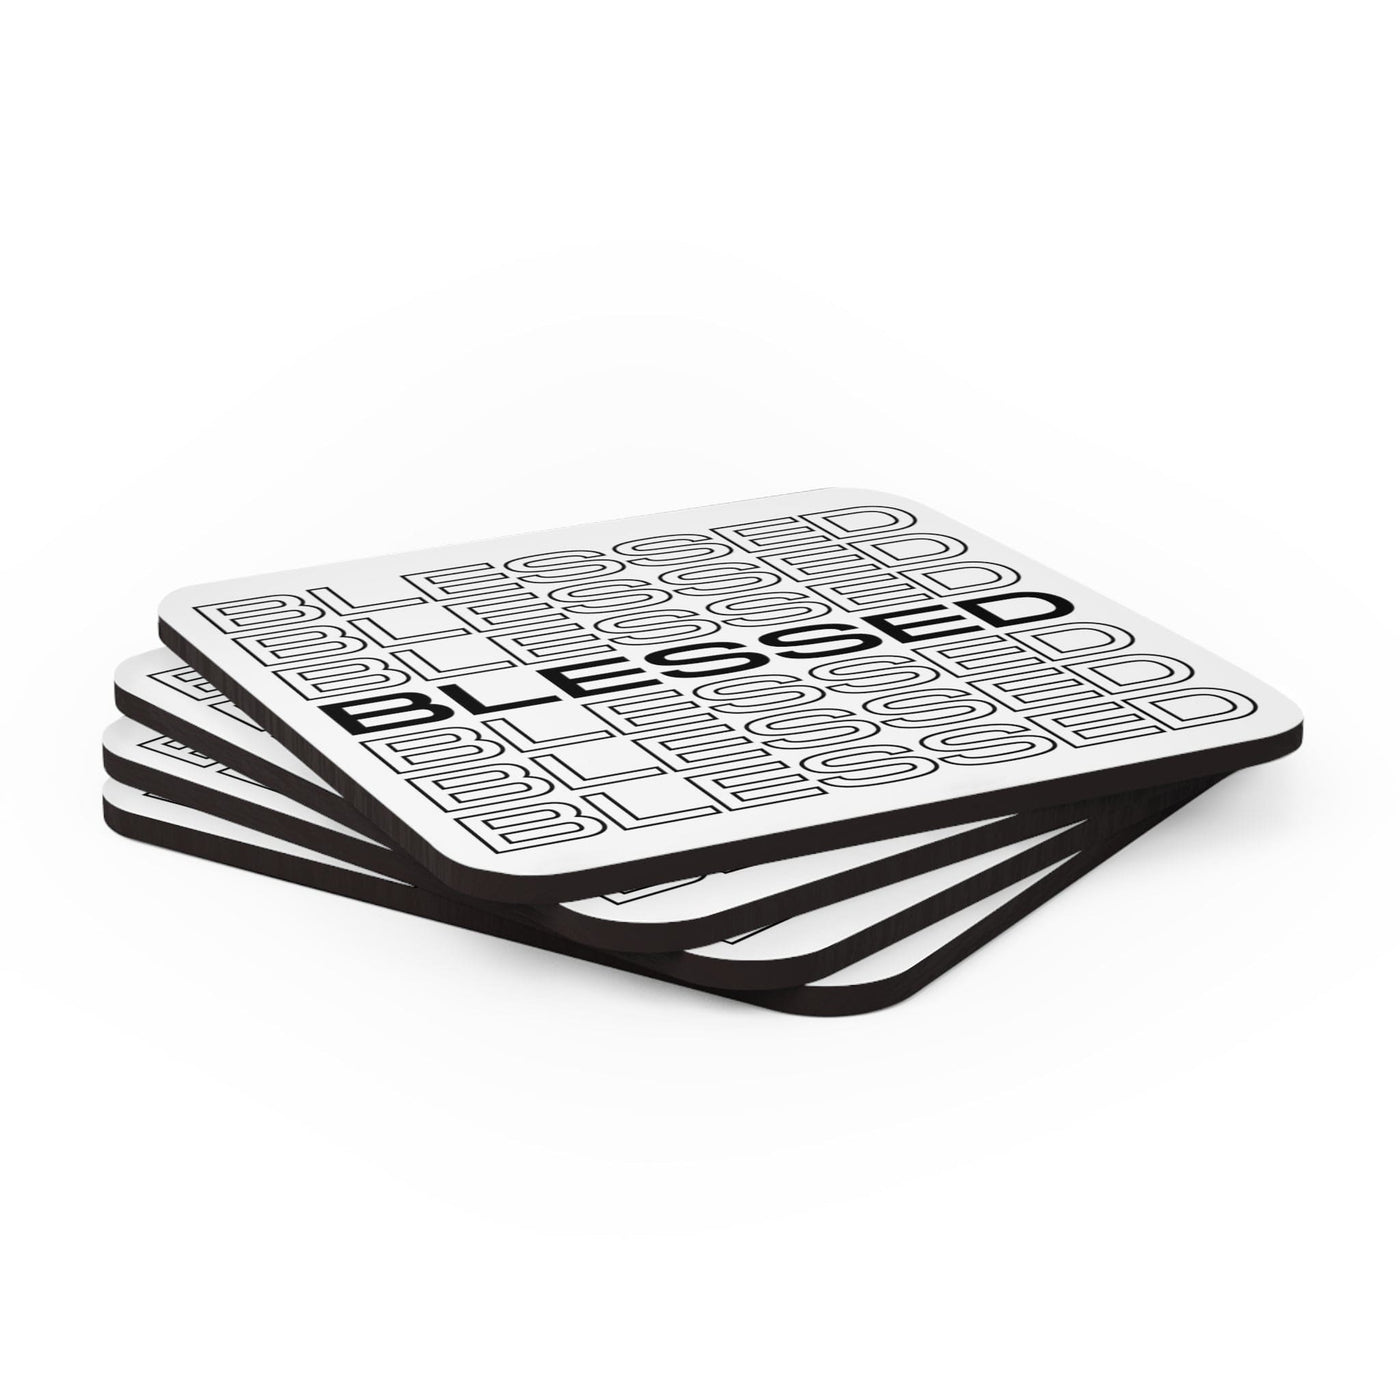 Coaster Set Of 4 For Drinks Stacked Blessed Print - Decorative | Coasters